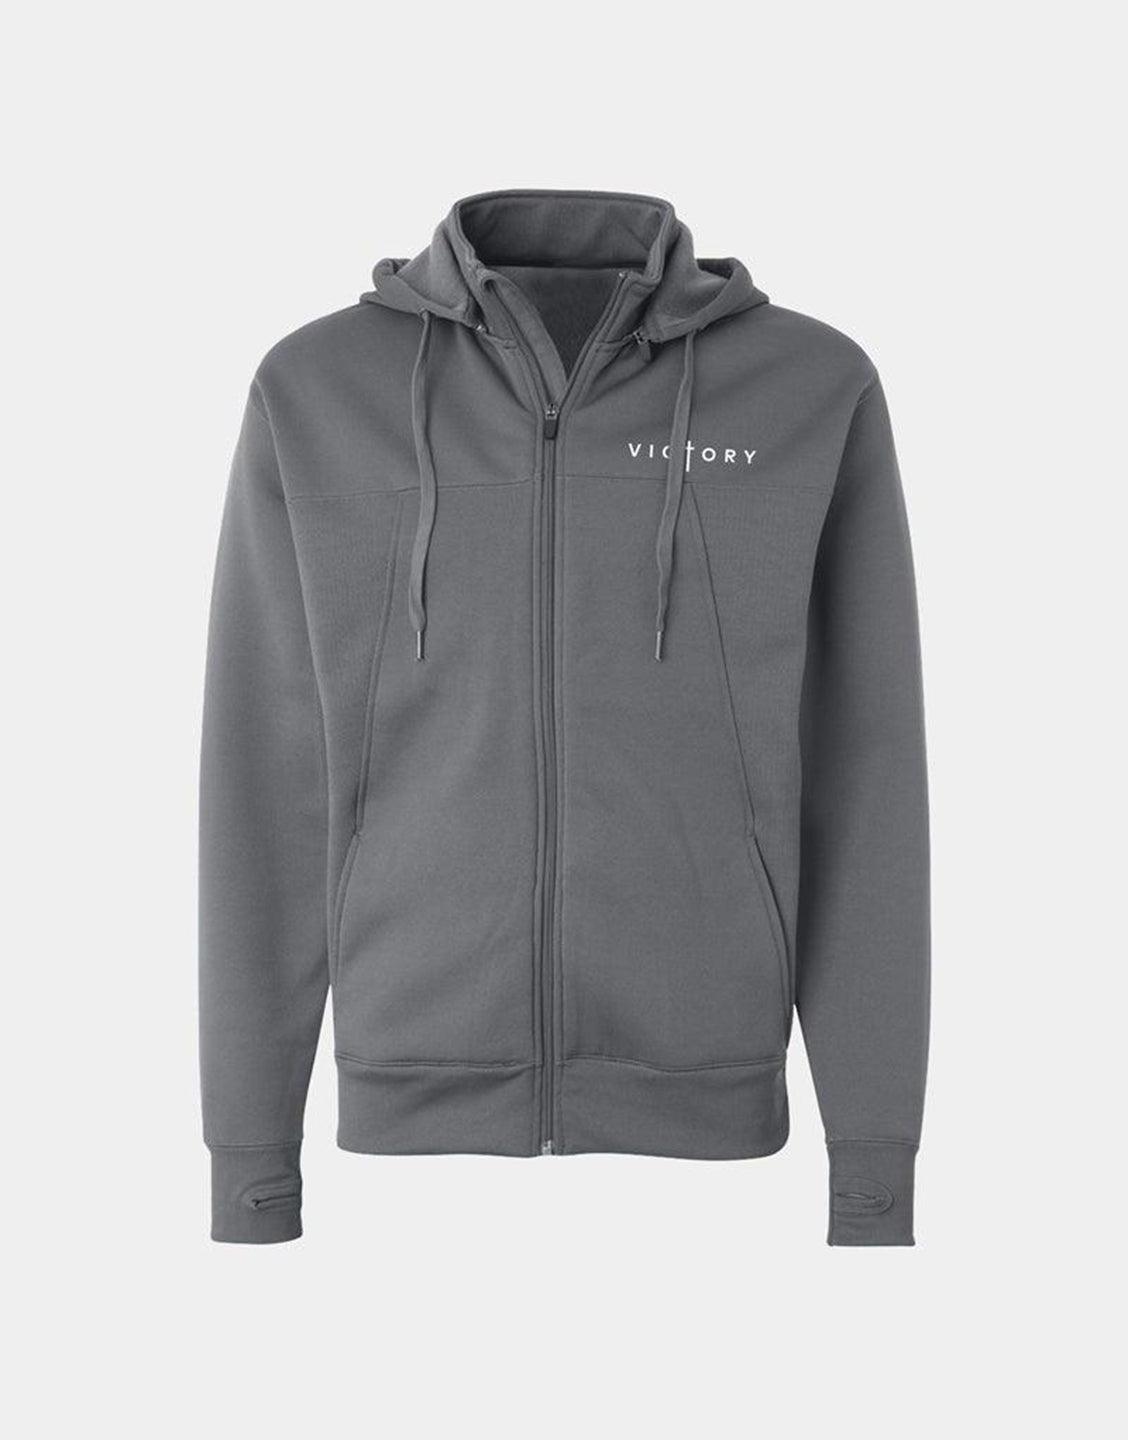 “Victory” Poly Tech Full-Zip Hoodie (Charcoal) - VOTC Clothing